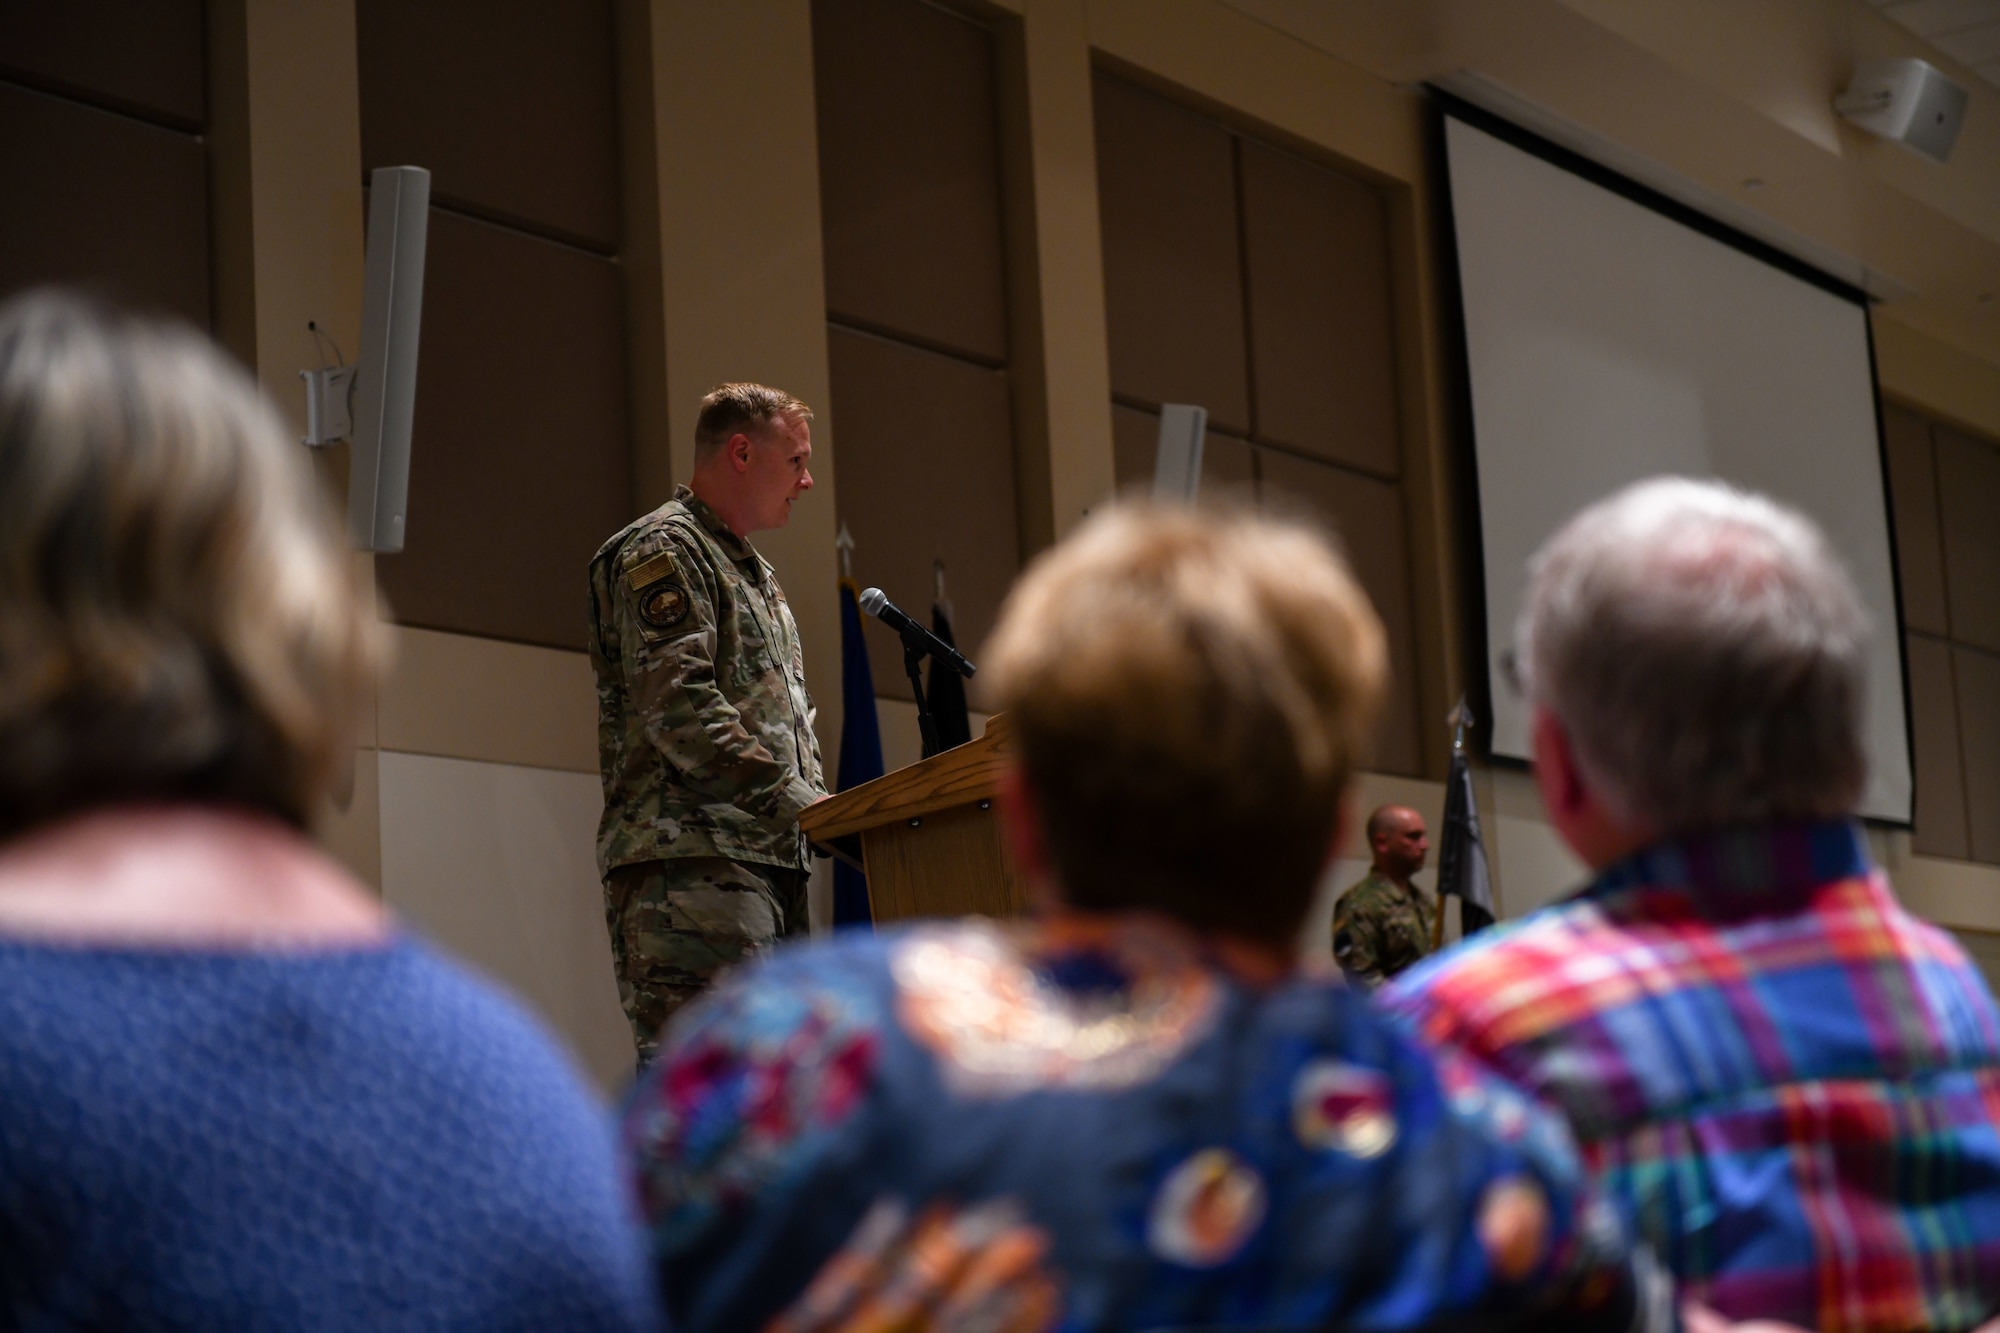 Maj. Luke Basham, Space Delta 4, Detachment 1 commander, addresses the crowd after the transferring of leadership during the DEL 4, DET 1 change of command ceremony at Buckley Space Force Base, Colo., June 24, 2021. Basham introduced himself and expressed his gratitude and excitement for the opportunity to lead the Airmen and Guardians of DET 1. (U.S. Space Force photo by Airman 1st Class Shaun Combs)